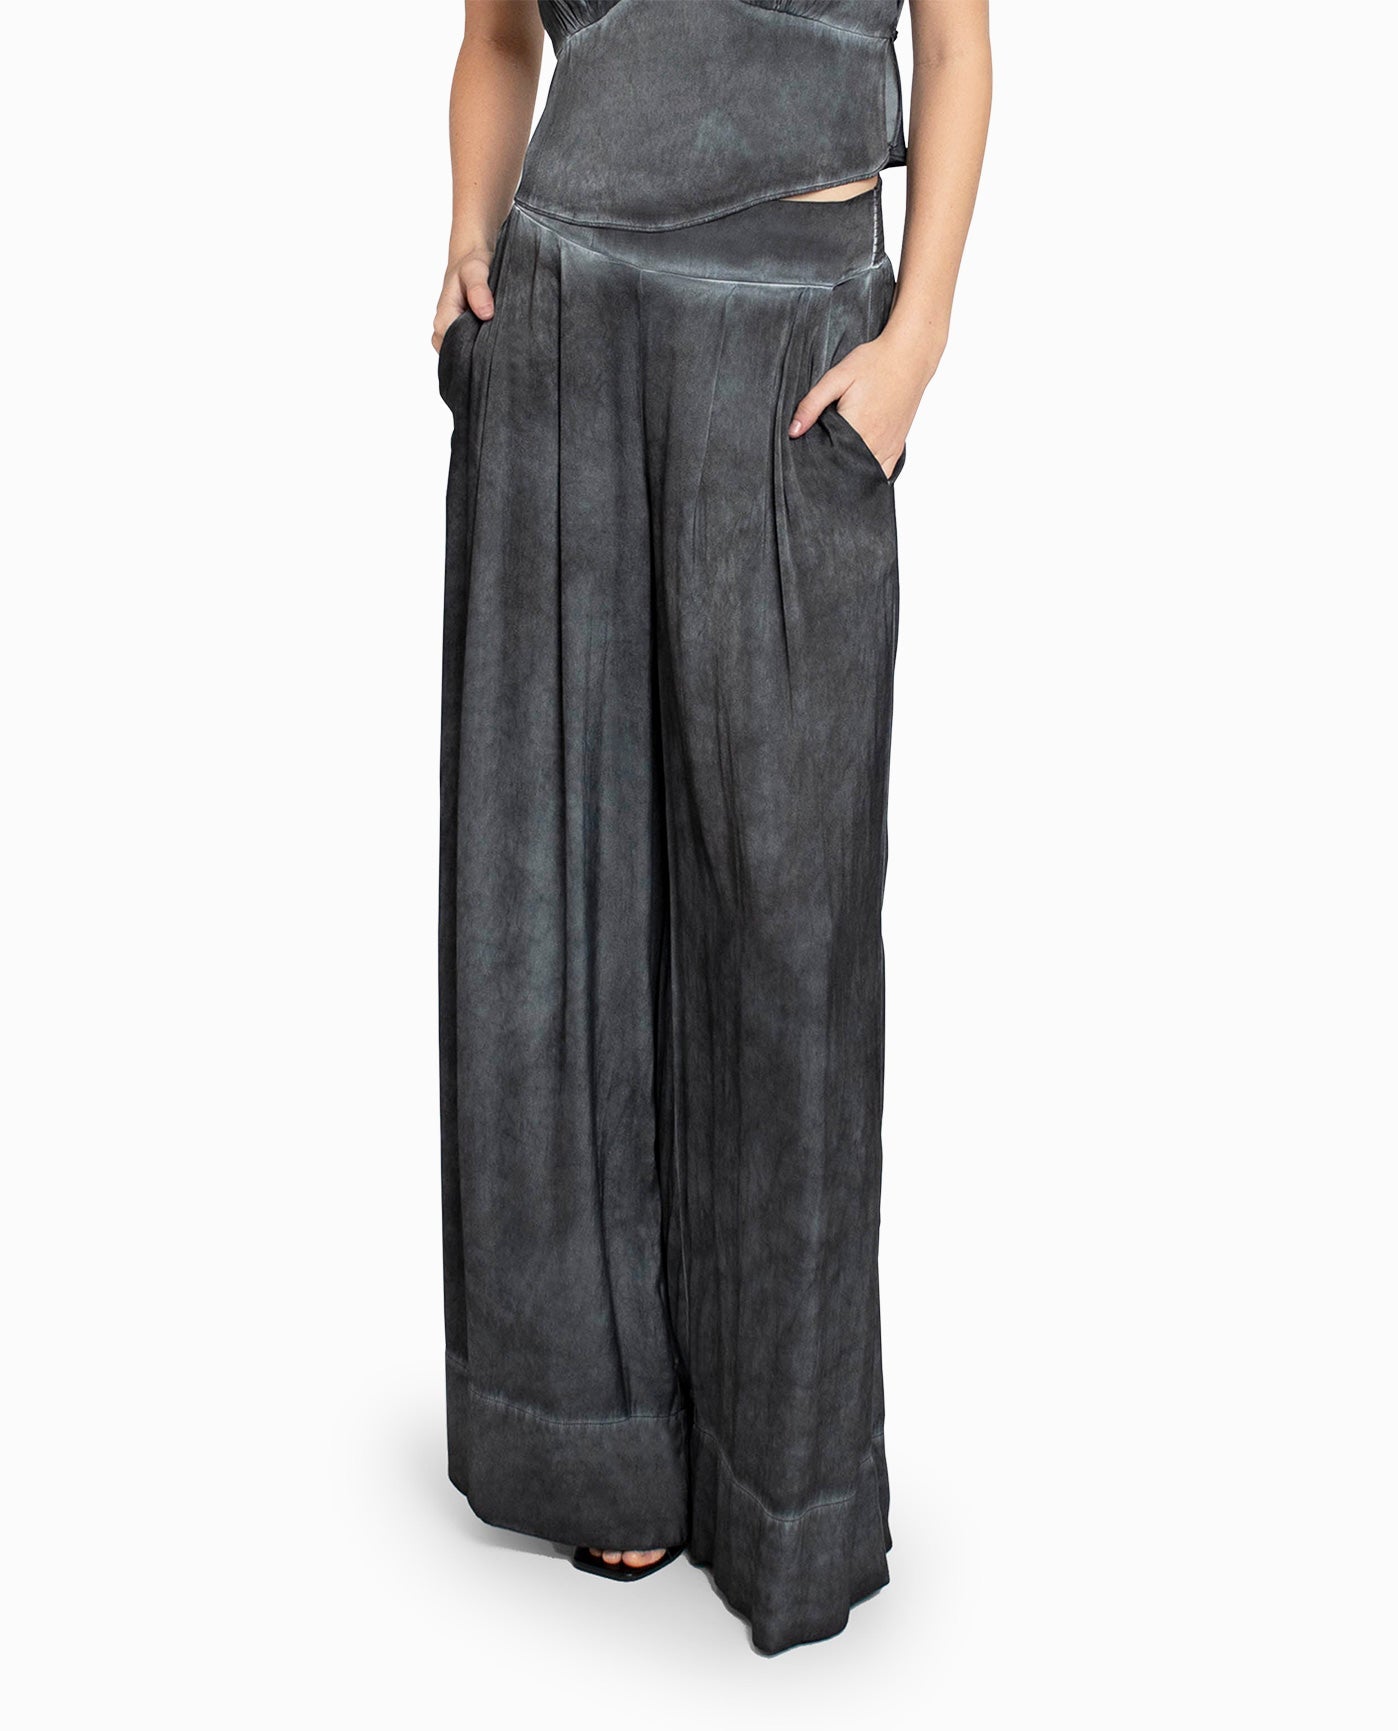 Black Pleated Linen Pant for Women, Custom Made, Made to Order